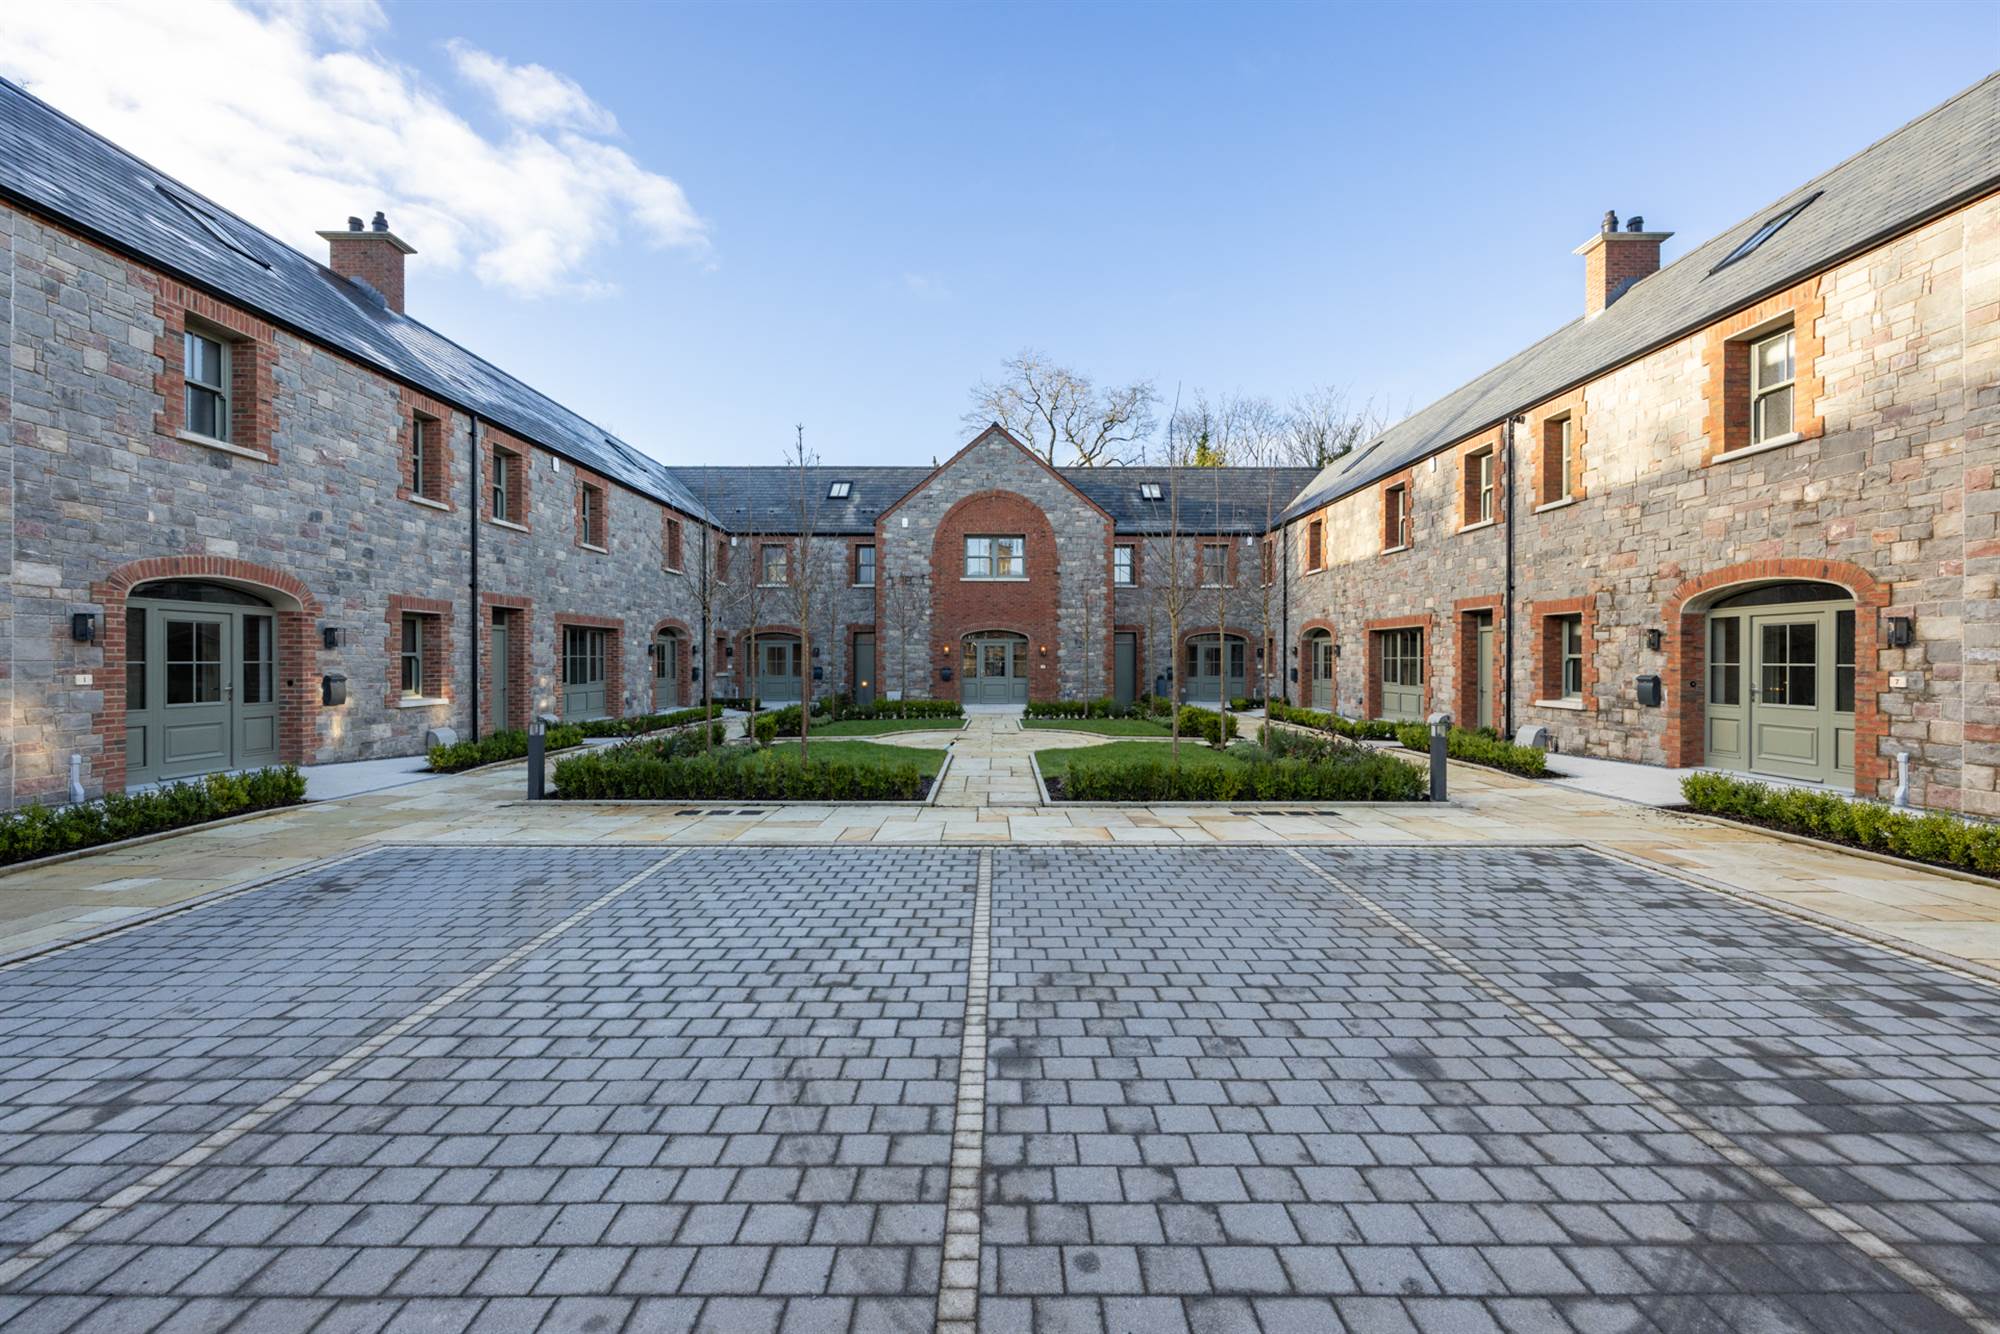 10 The Courtyard